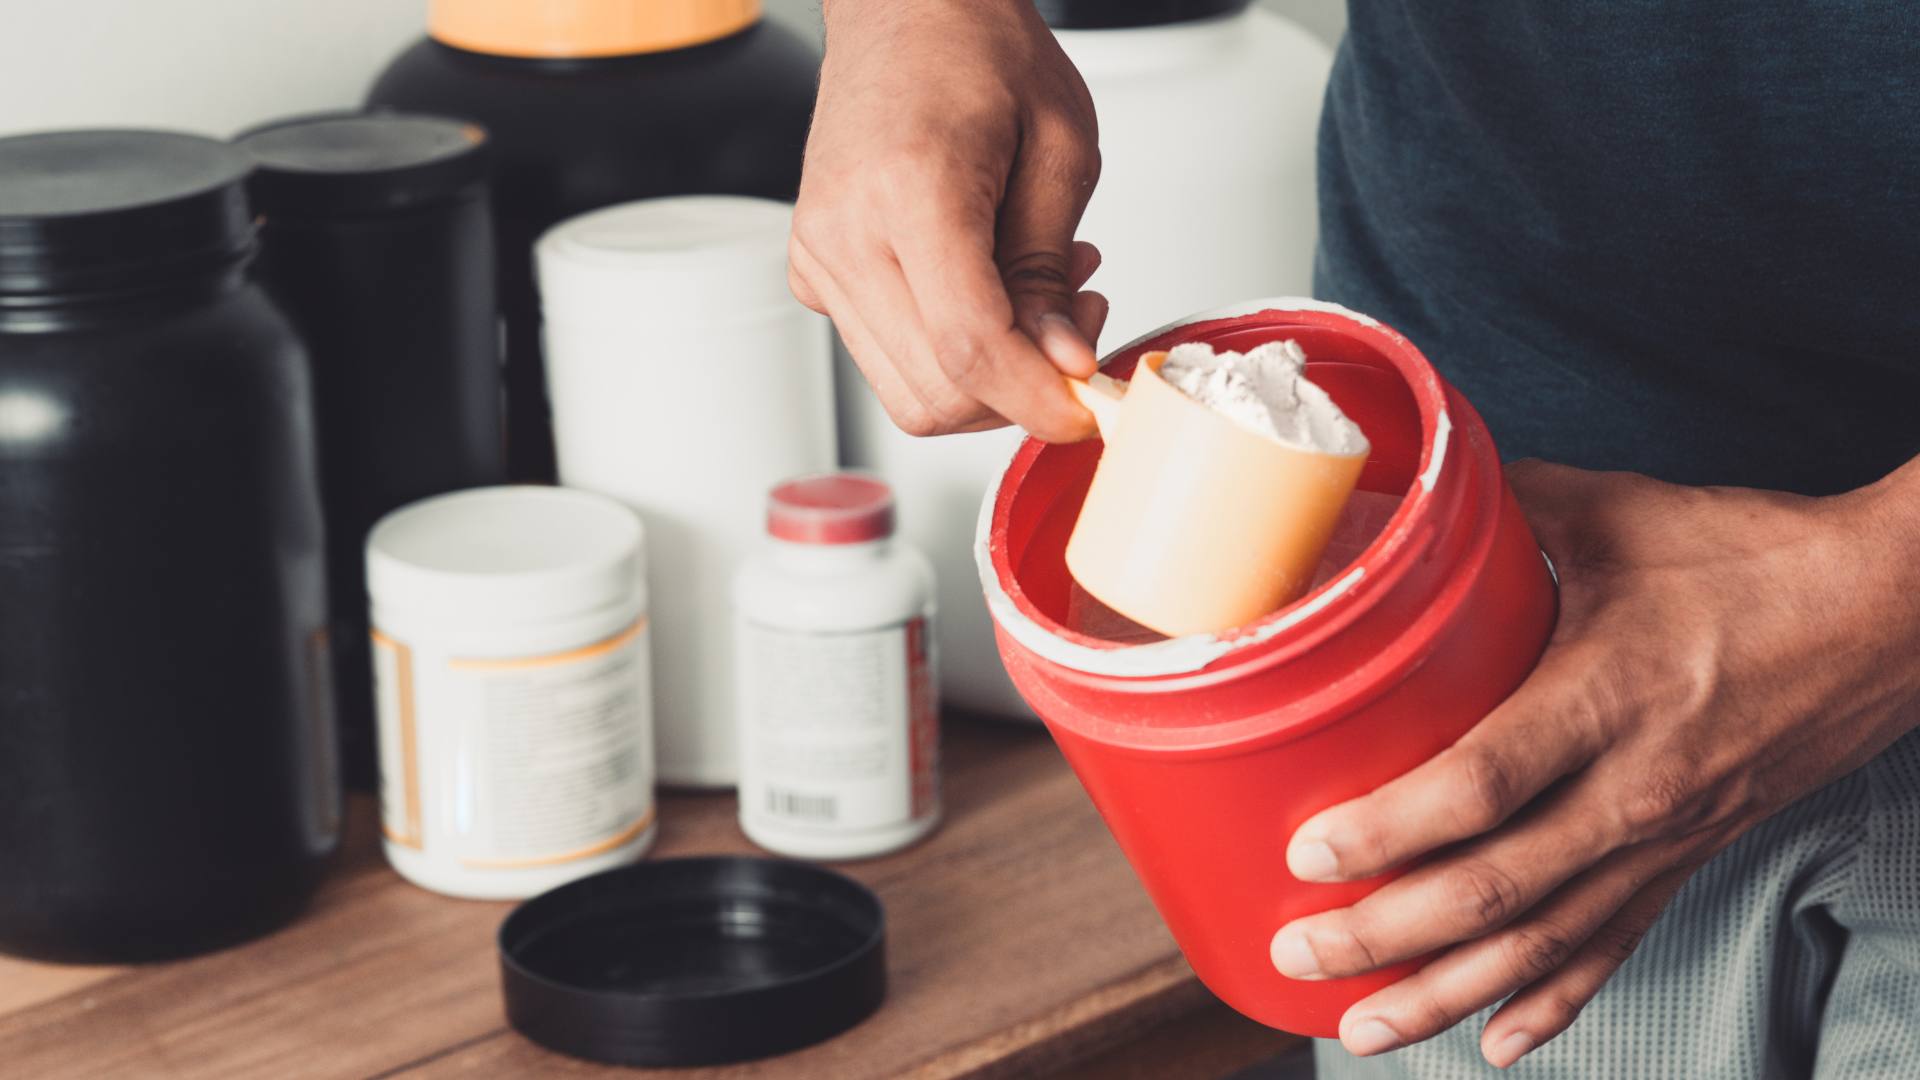 A person scoops creatine out of a red container.